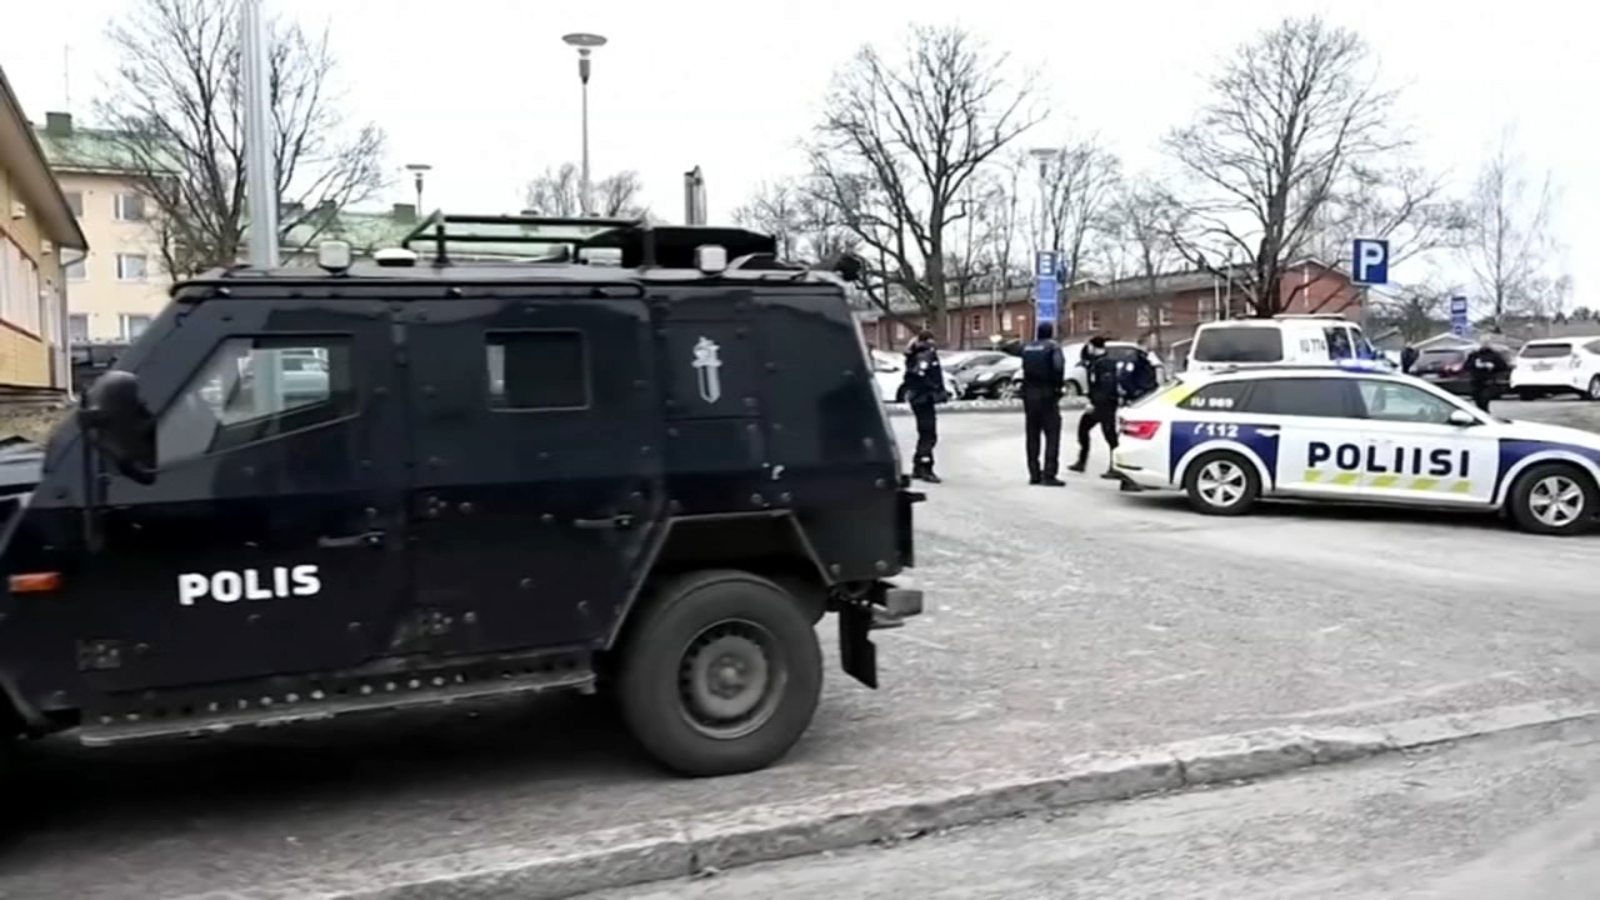 School shooting Finland: 12-year-old dies, 2 others hurt after 12-year-old shooter opens fire in Vantaa, police say [Video]